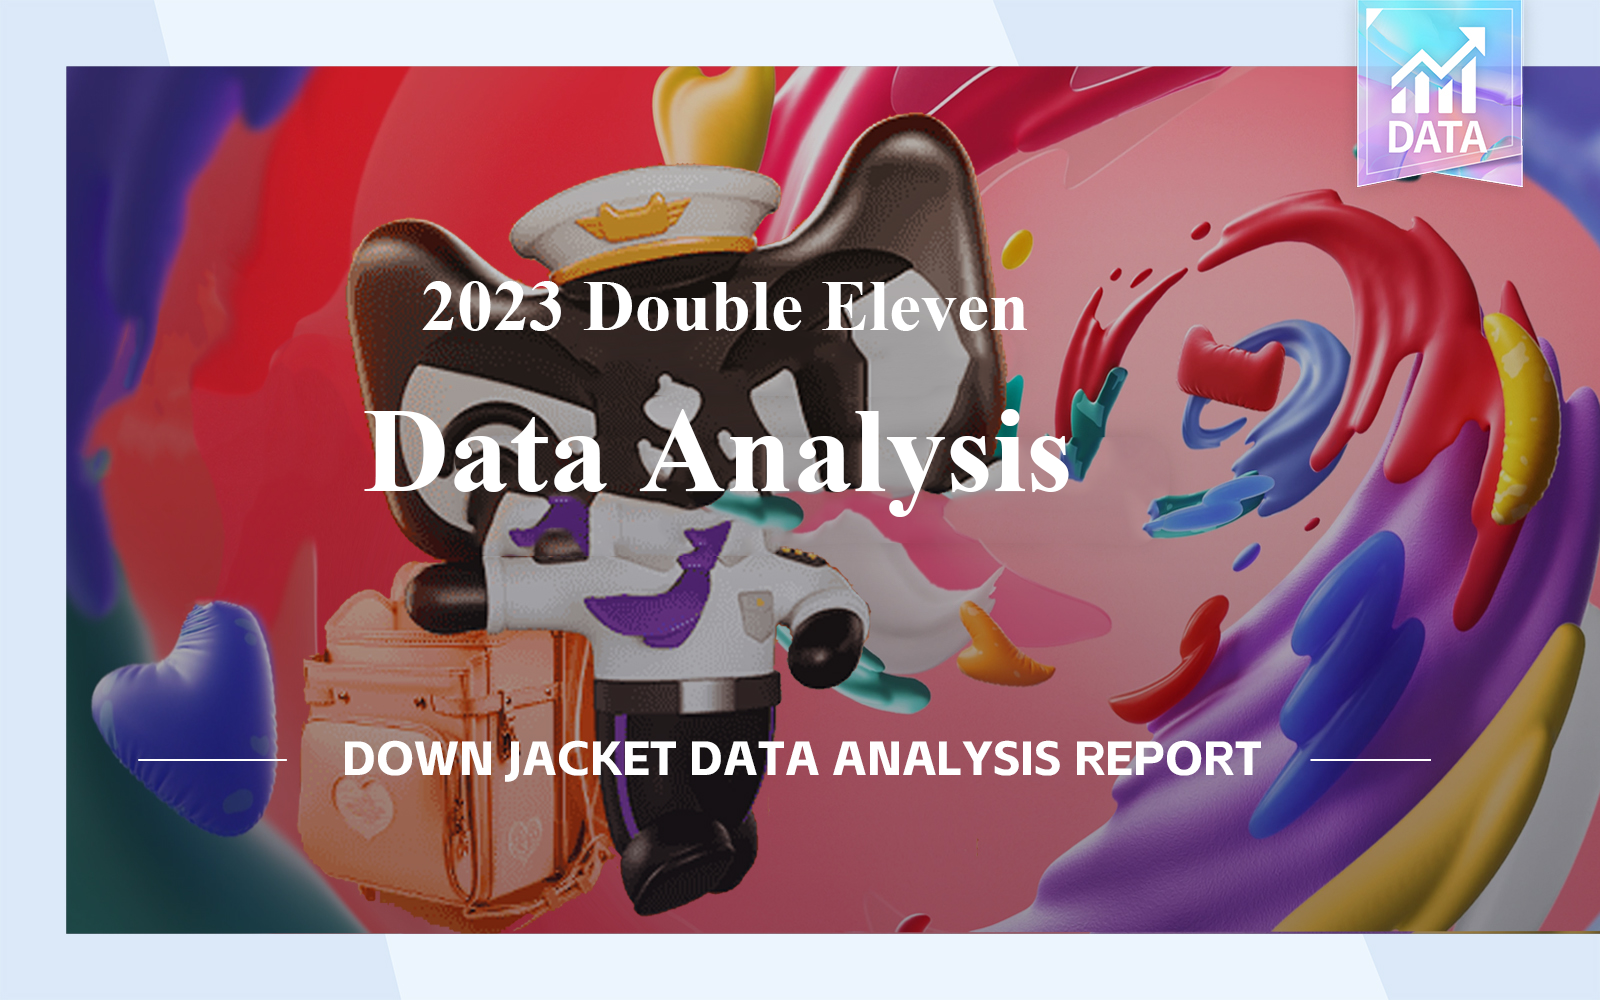 2023 Double Eleven Data Analysis of Women's Down Jacket